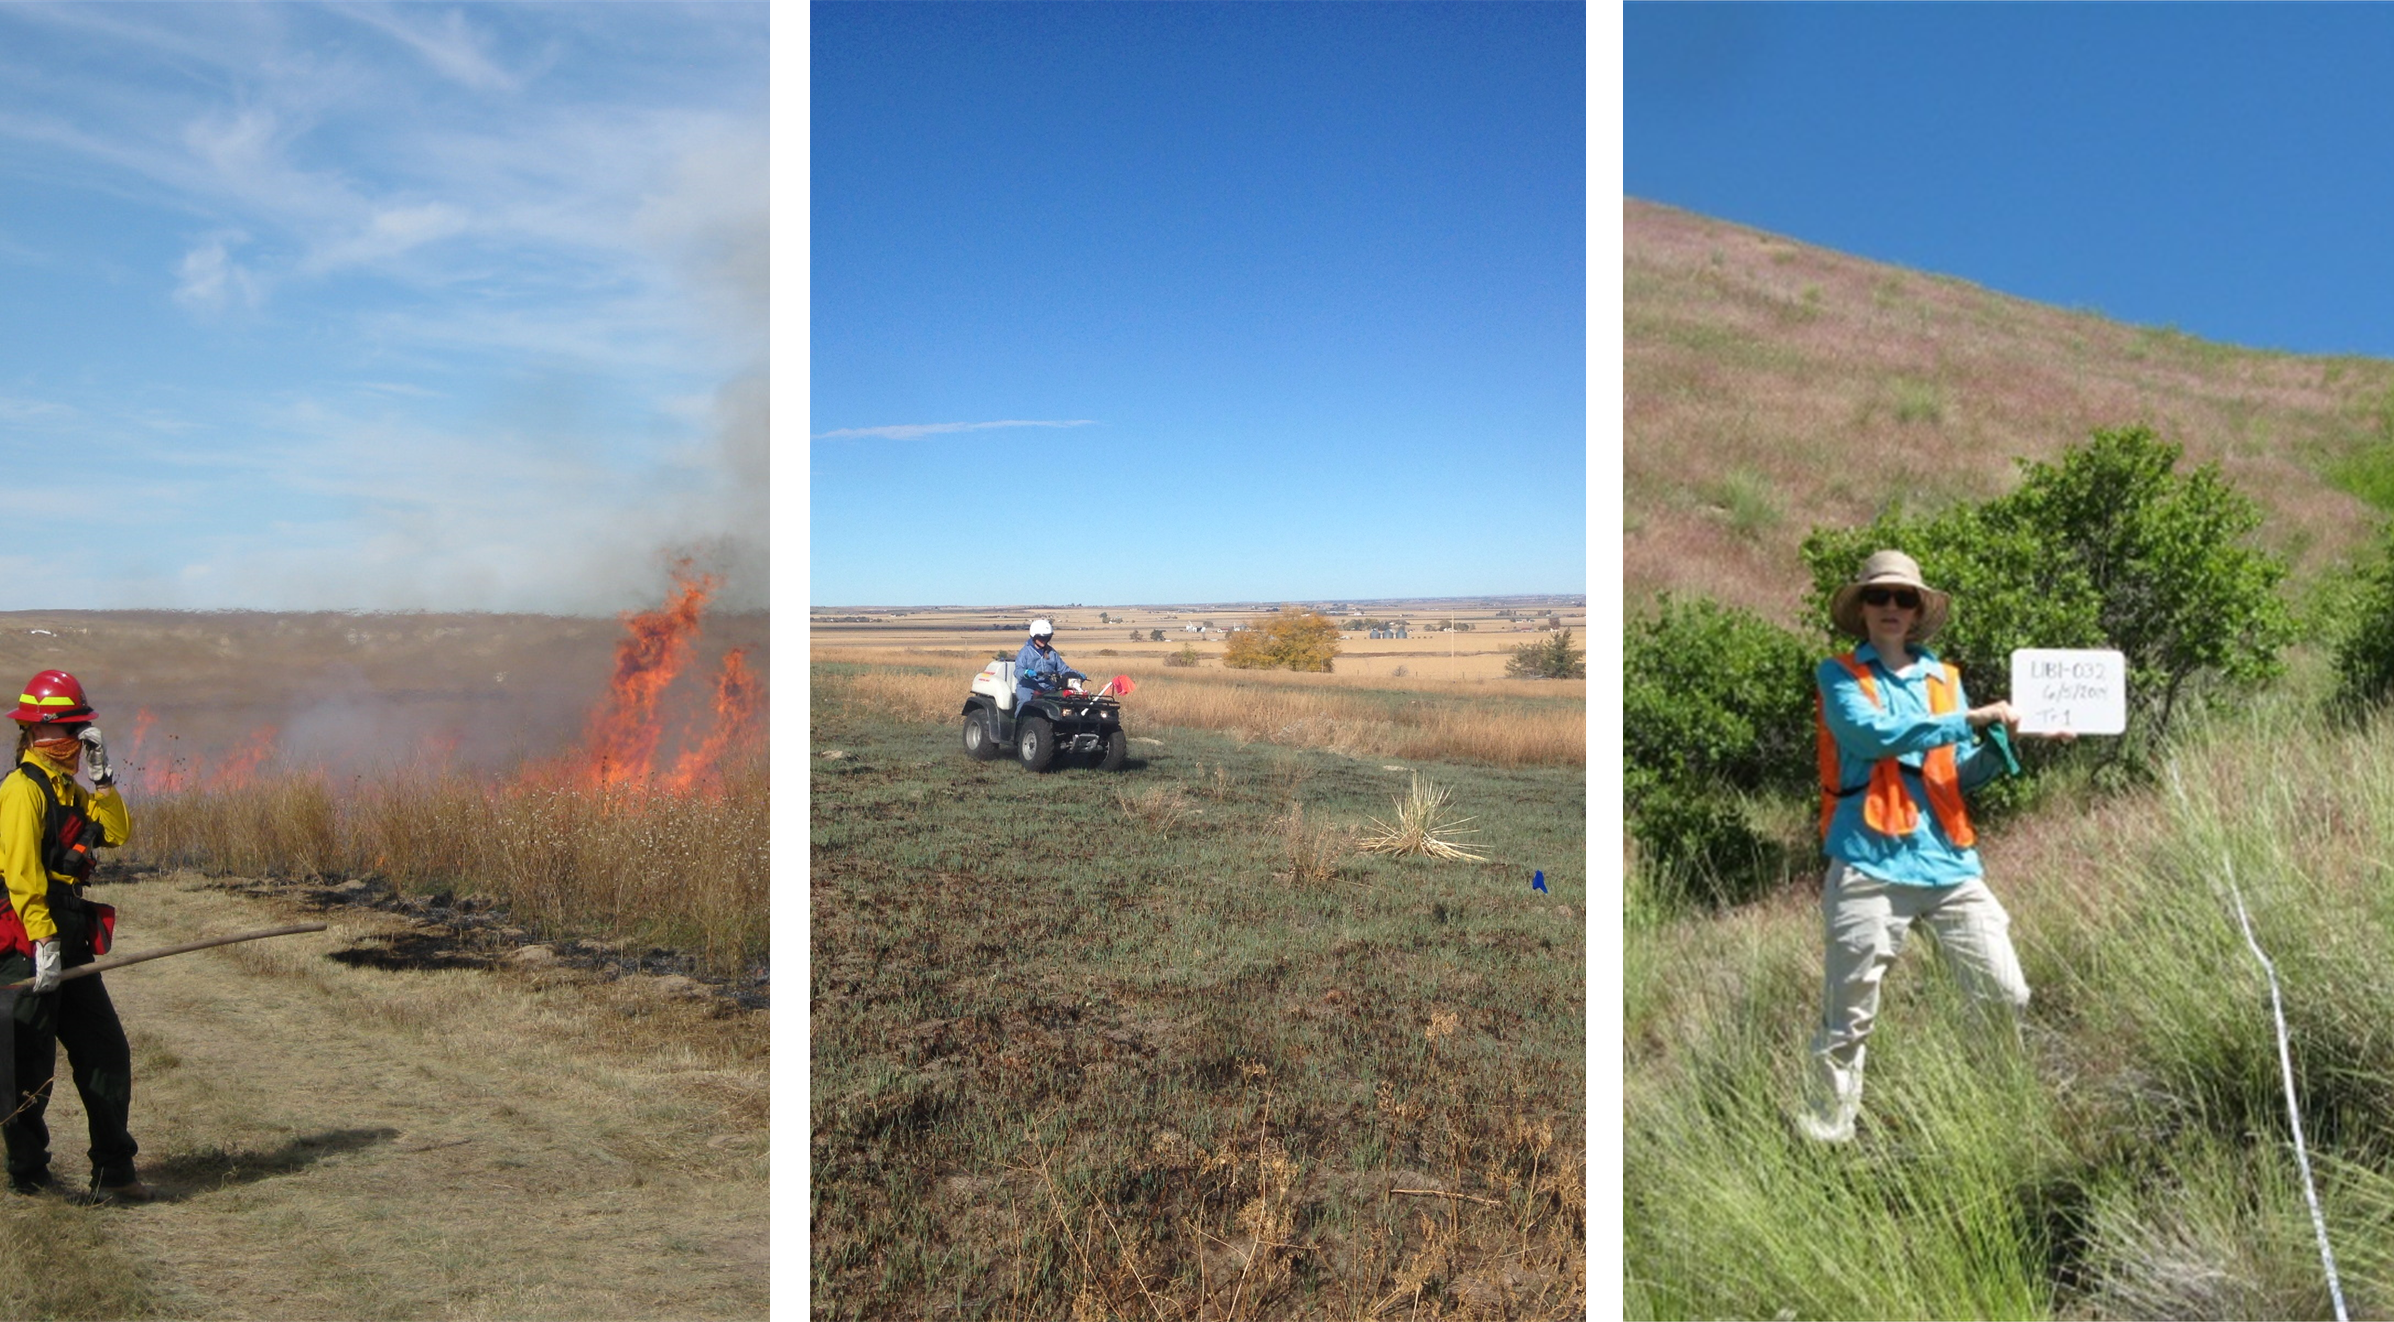 Three photos showing fire fighters lighting grass on fire, people riding an ATV, and field workers.